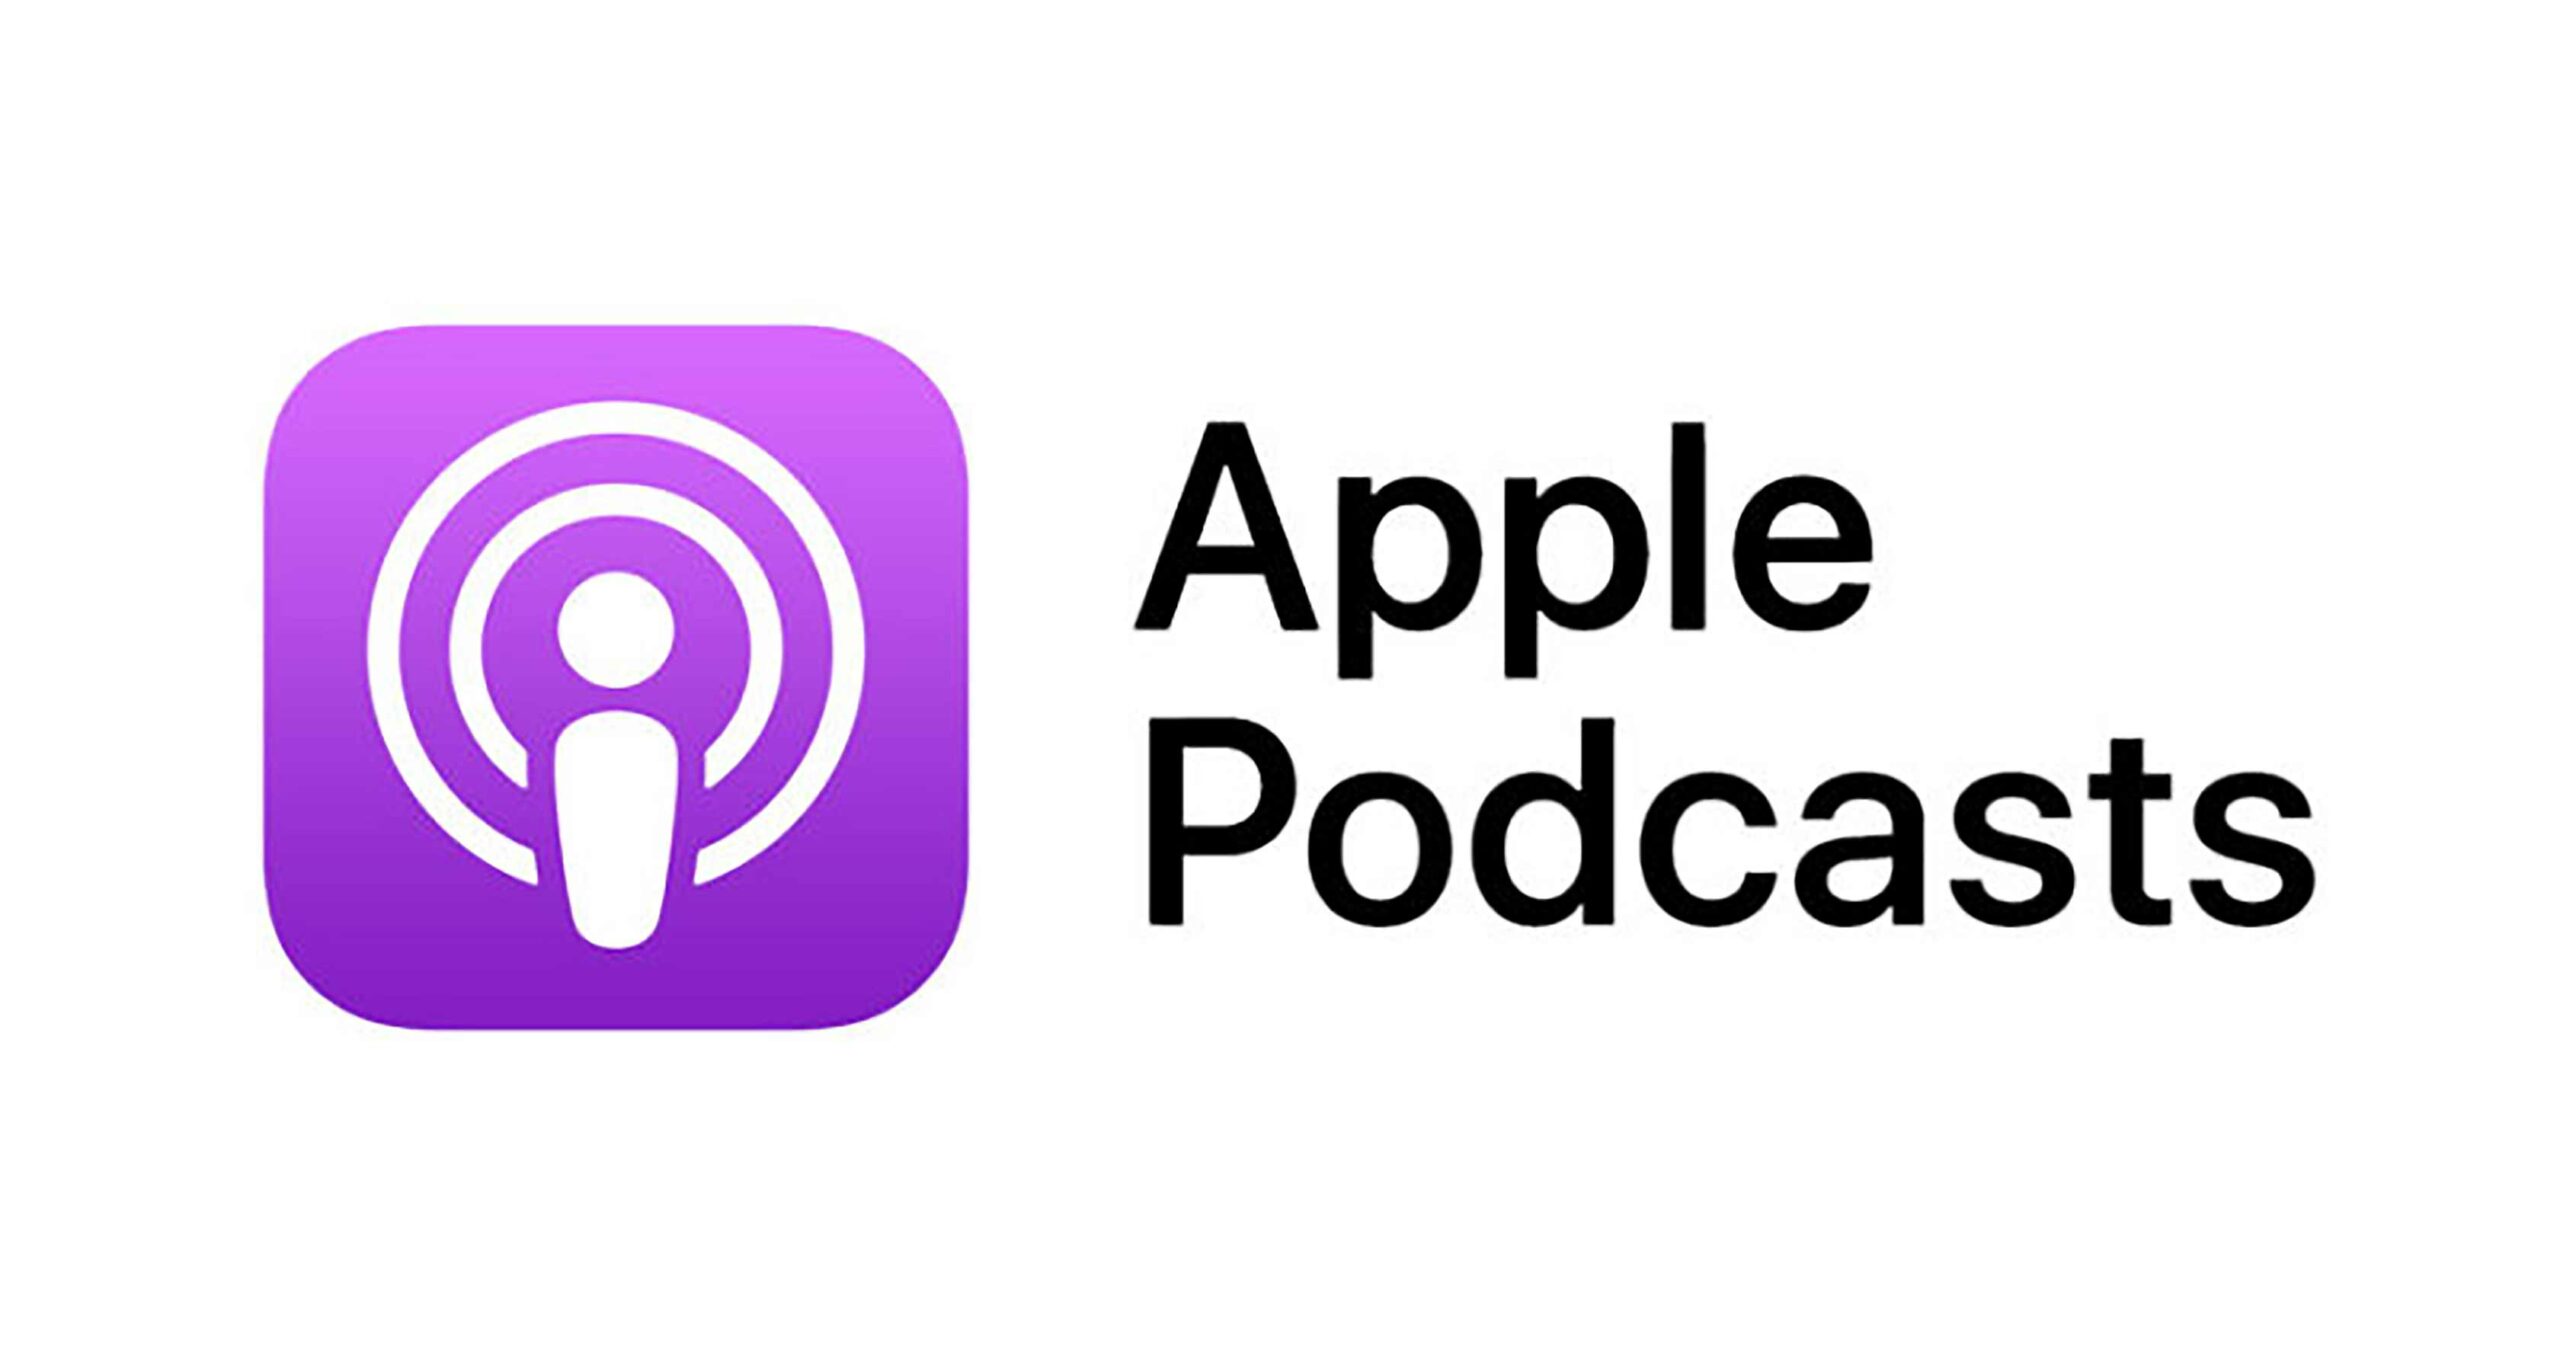 iOS 14 to include revamped Podcasts app with recommendations, extras:  rumour – MobileSyrup